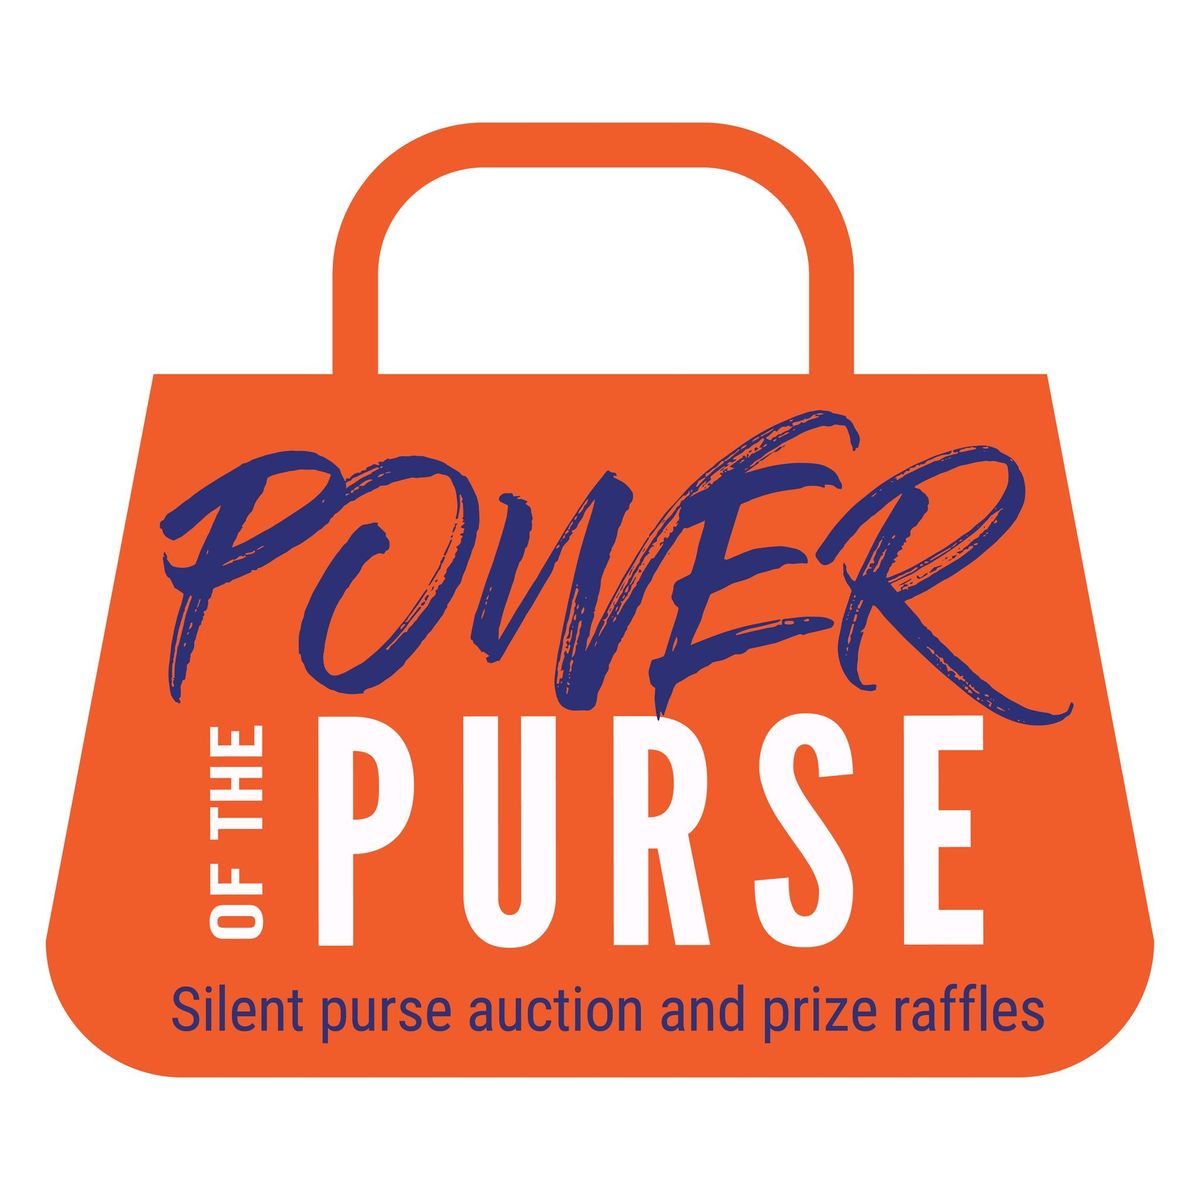 Power of the Purse